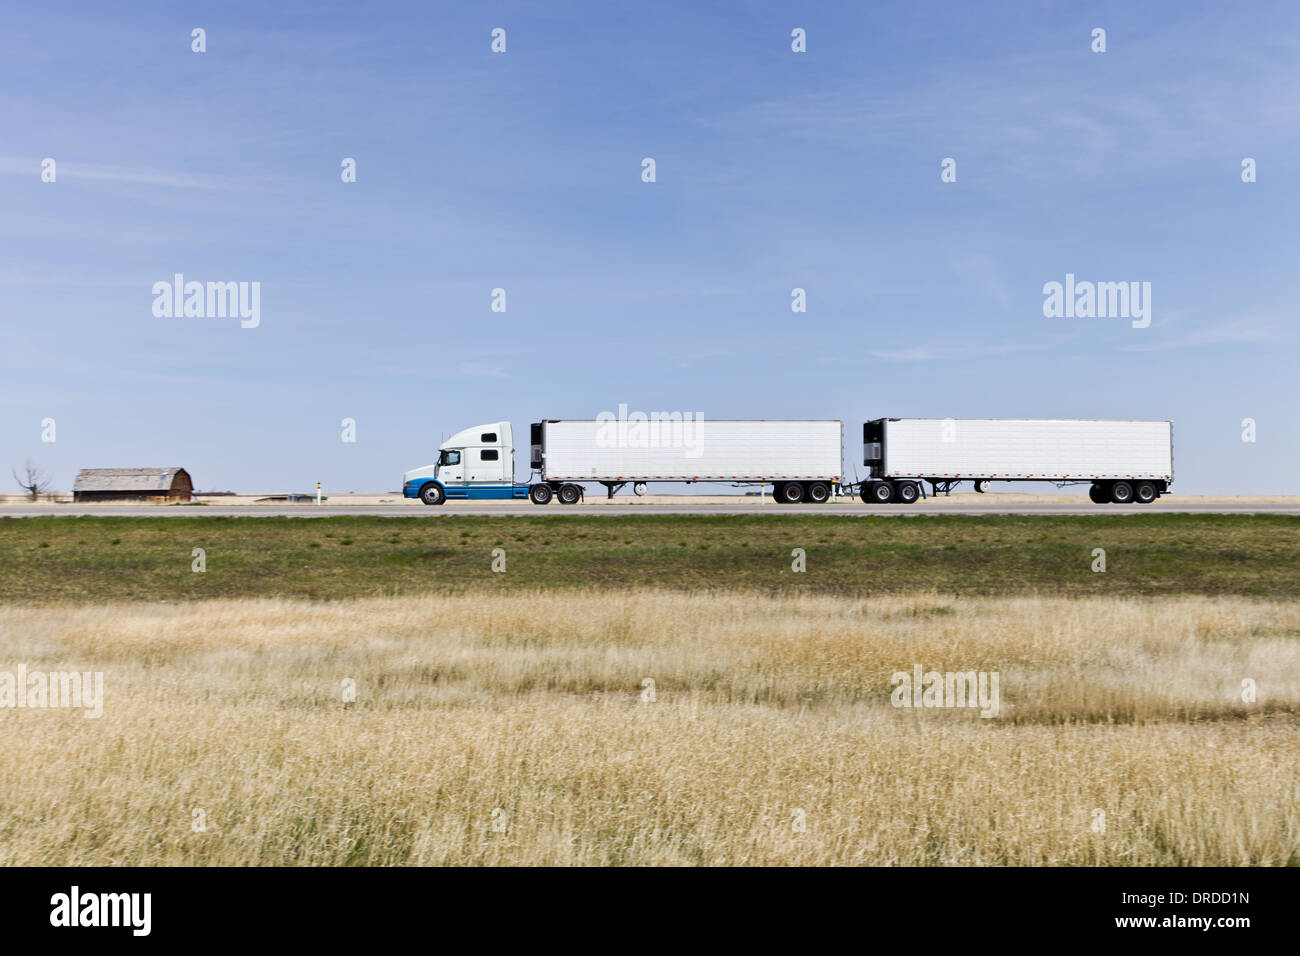 White Semi truck on the Highway heading right to left with motion blur of background two white reefer van trailers in turnpike double configuration Stock Photo